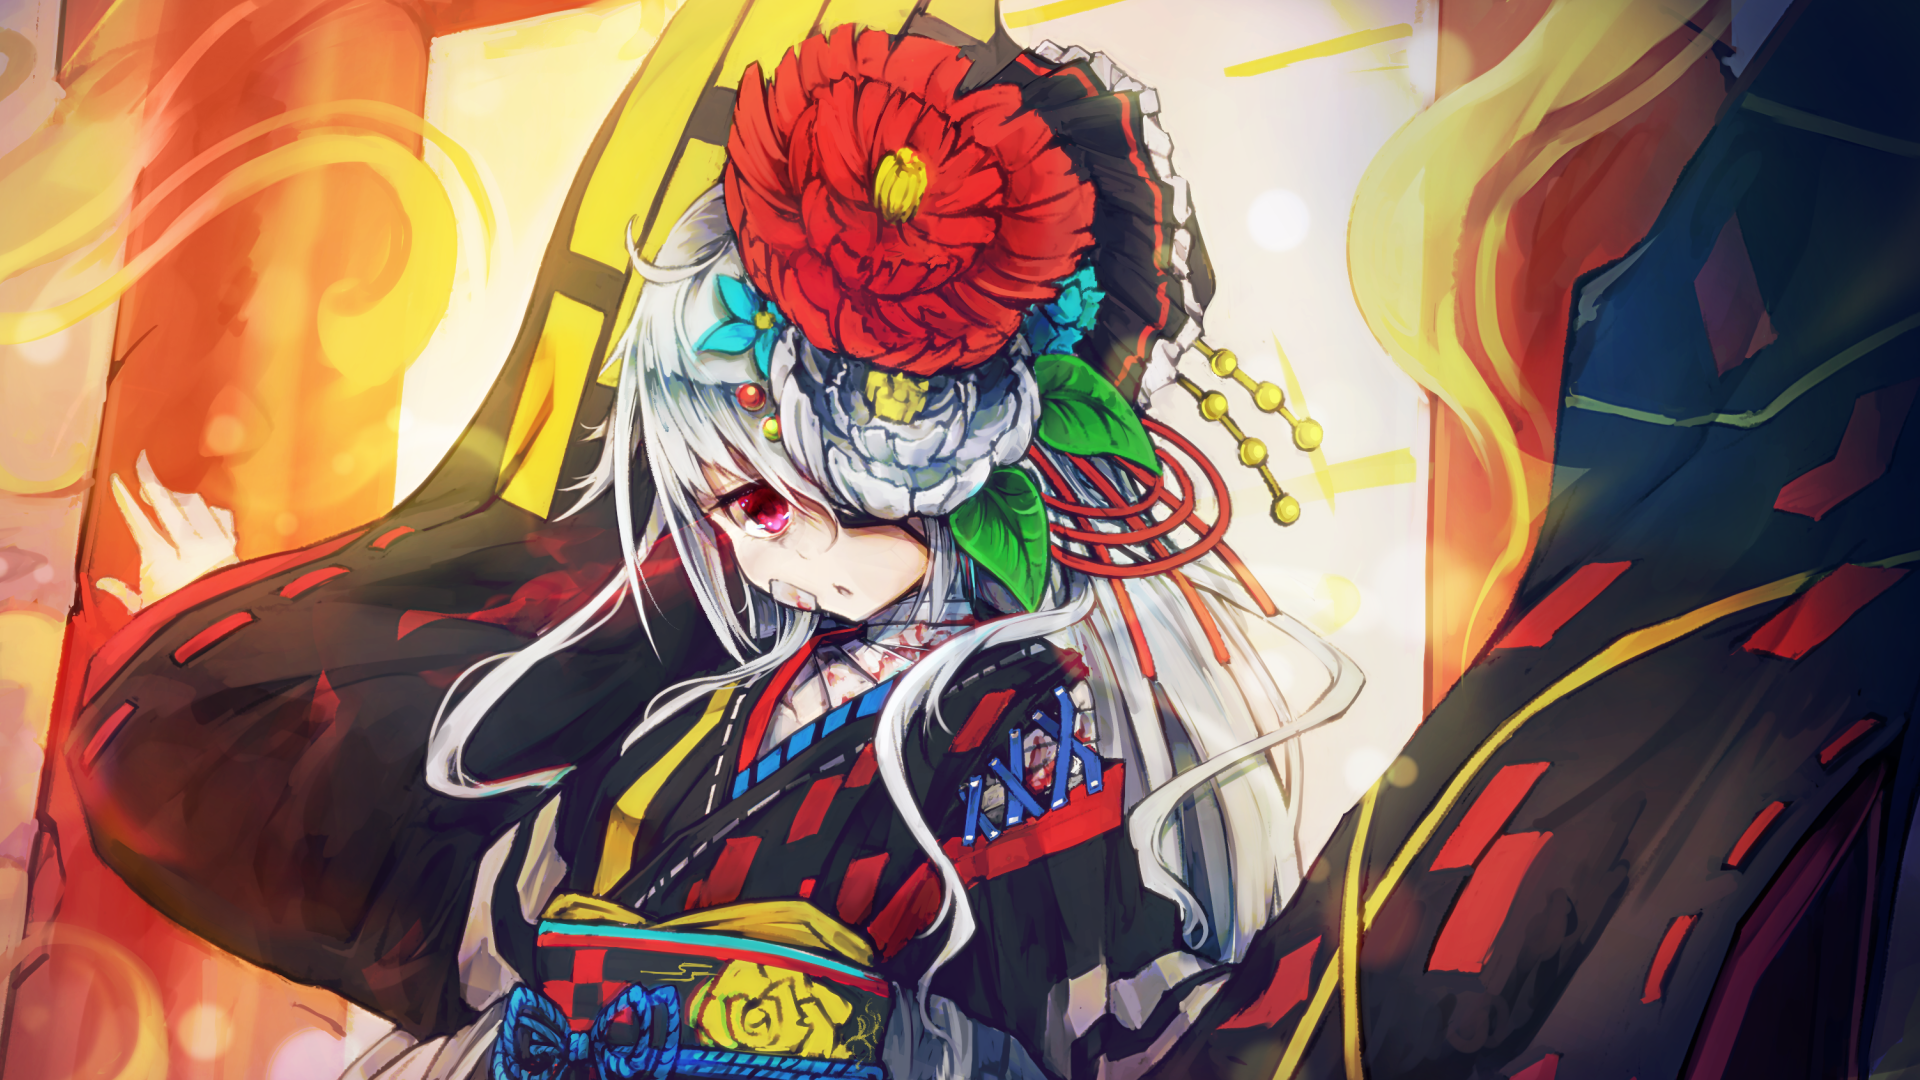 Anime 1920x1080 anime anime girls red eyes flowers leaves colorful